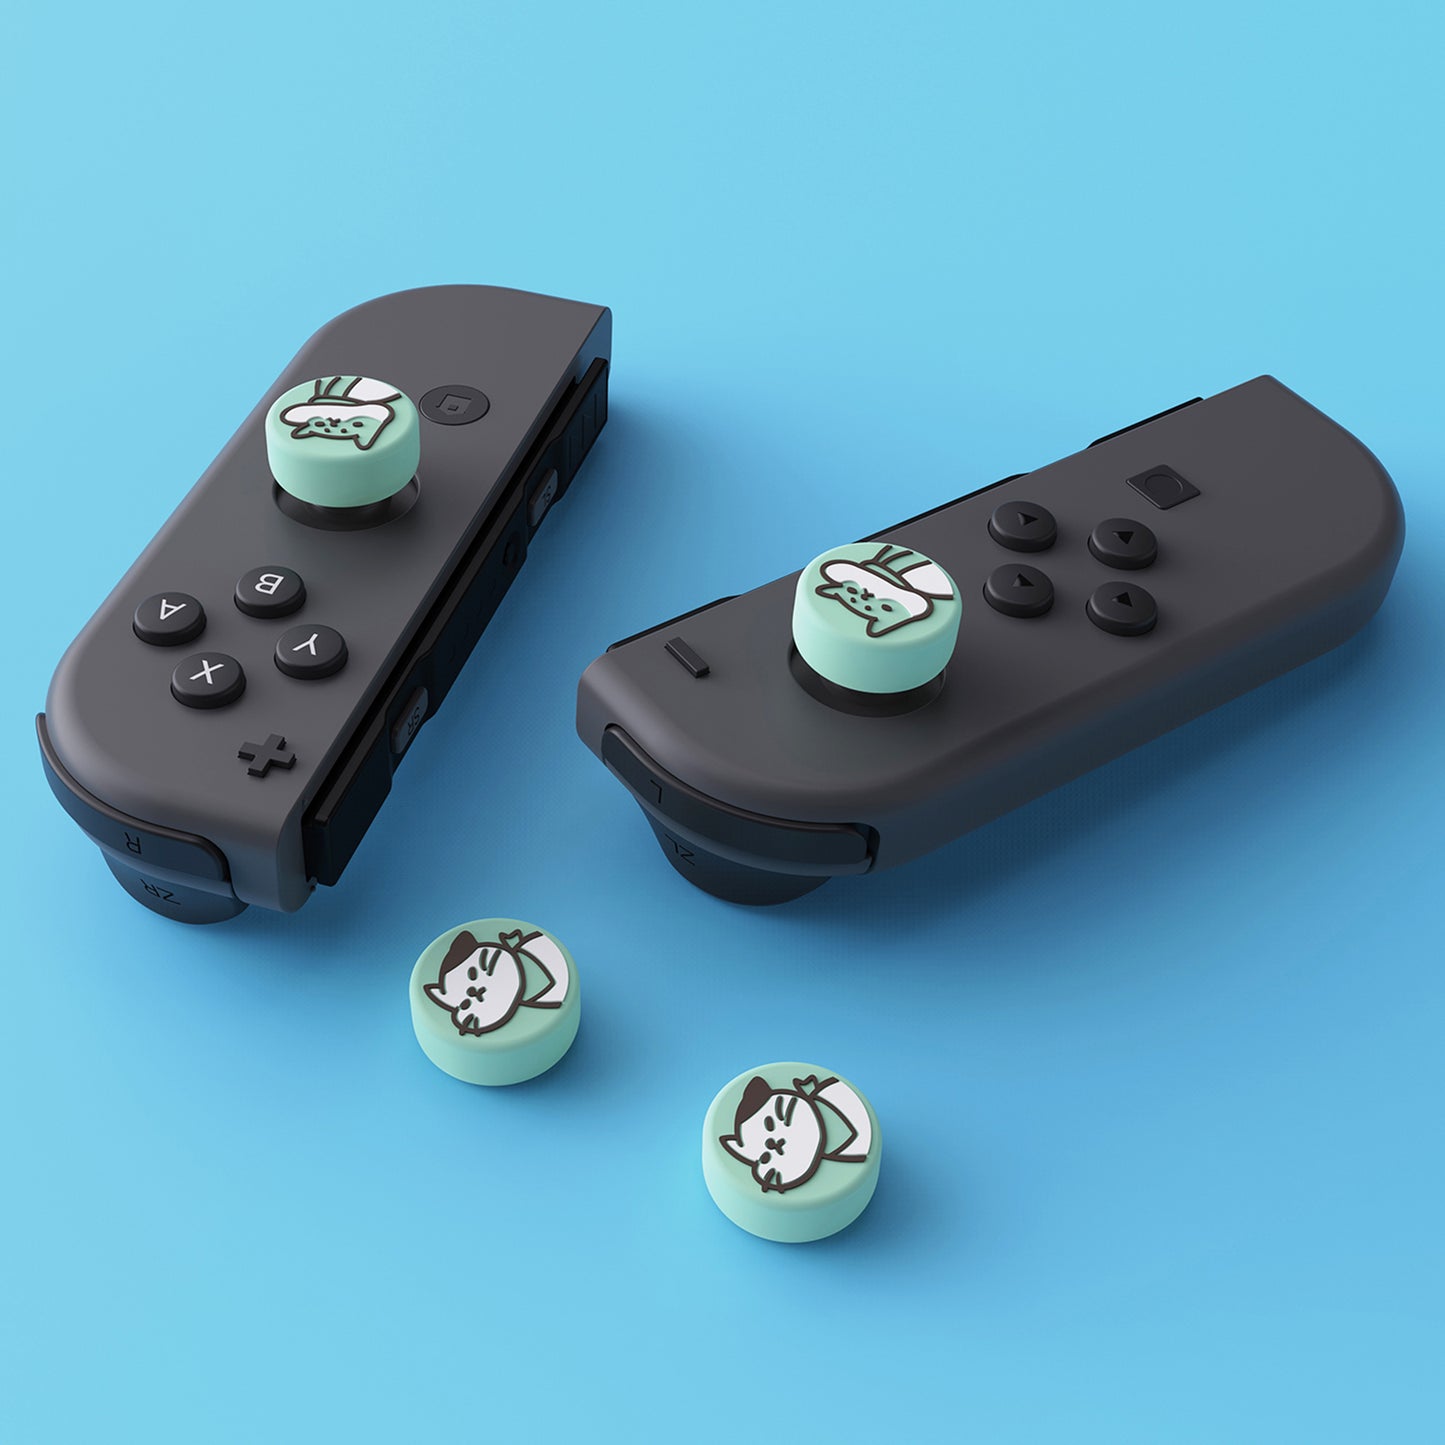 PlayVital Kitten & Doggie Cute Switch Thumb Grip Caps, Joystick Caps for Nintendo Switch Lite, Silicone Analog Cover Thumbstick Grips for Switch OLED Joycon - Seafoam Green - NJM1111 playvital